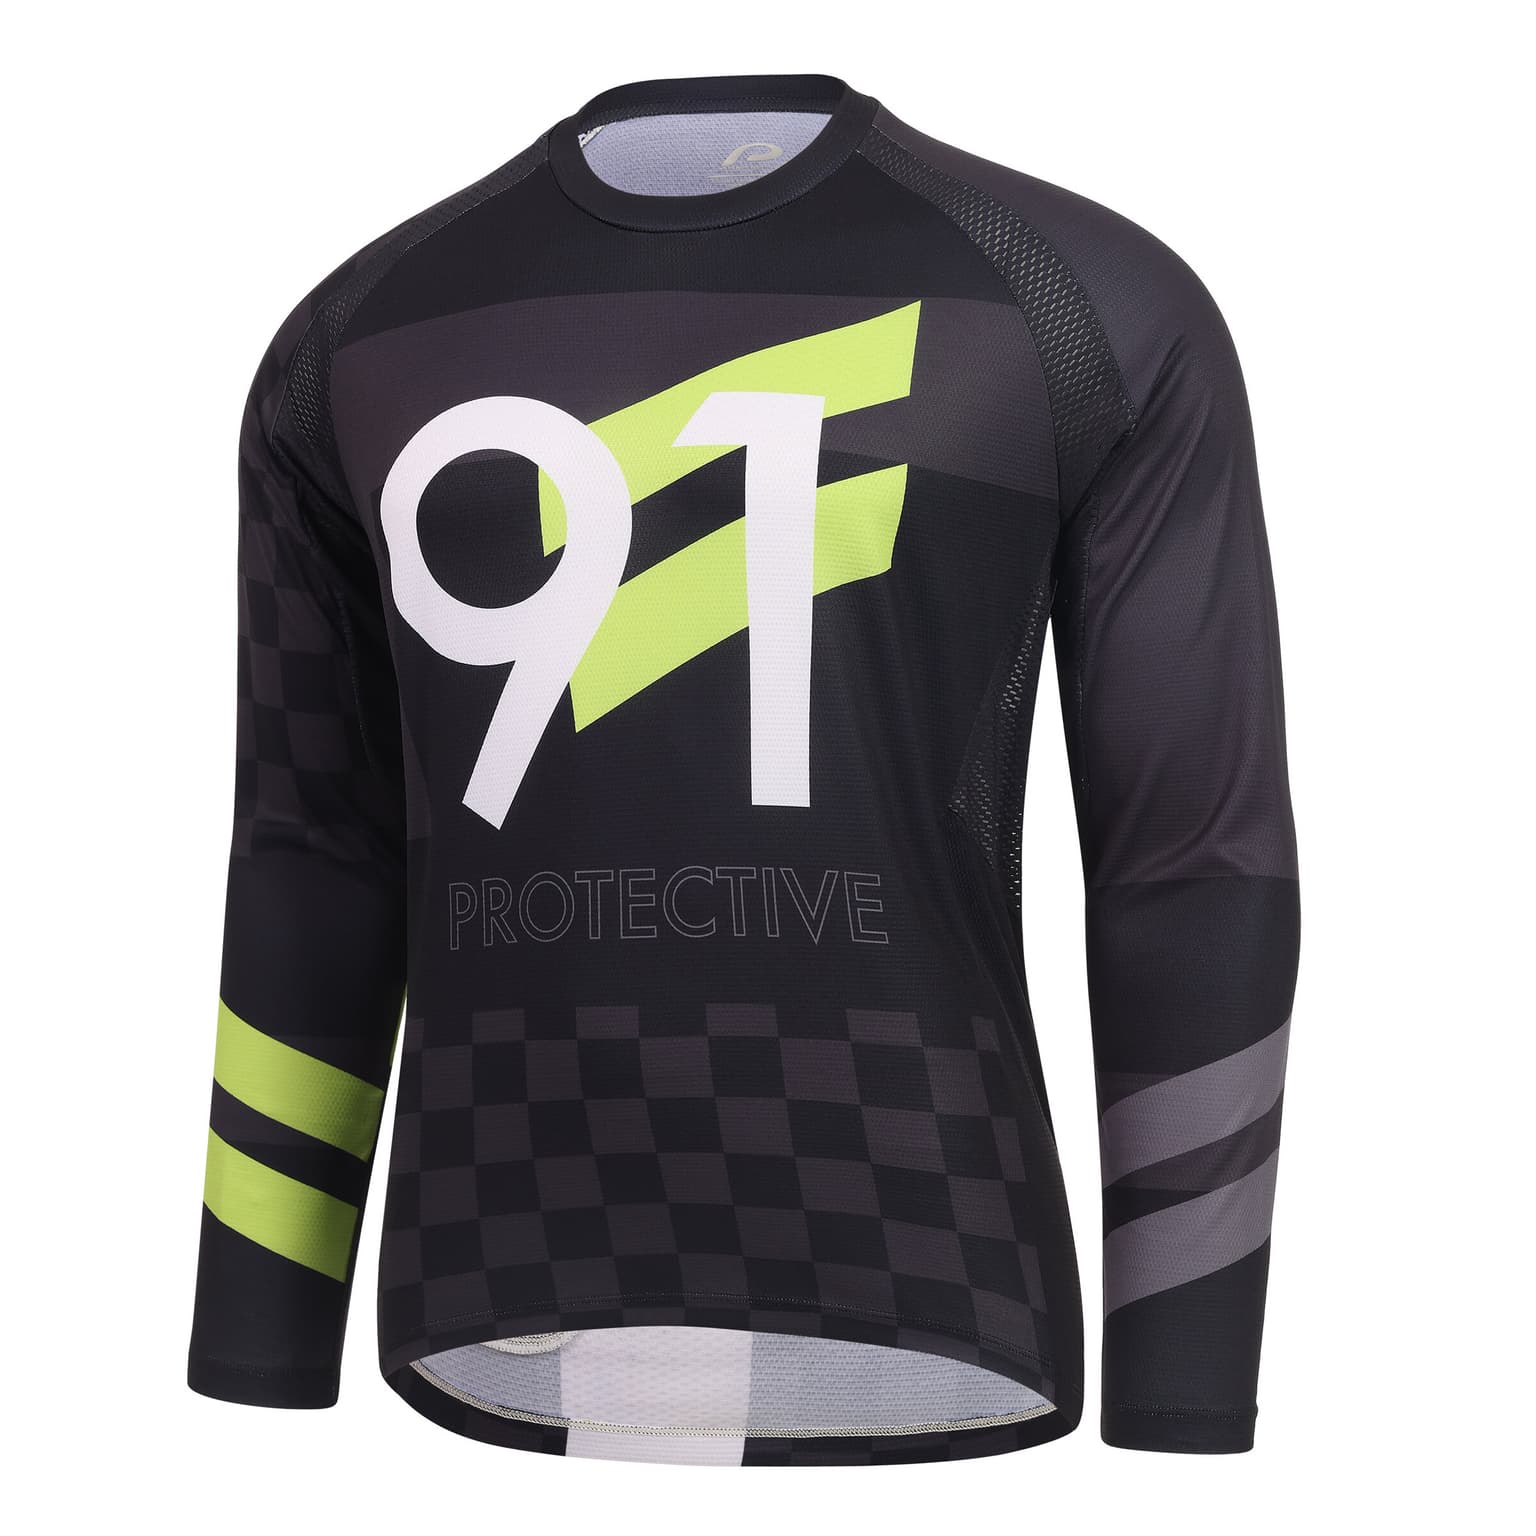 Protective Protective P-SO FLY Chemise de vélo antracite 1